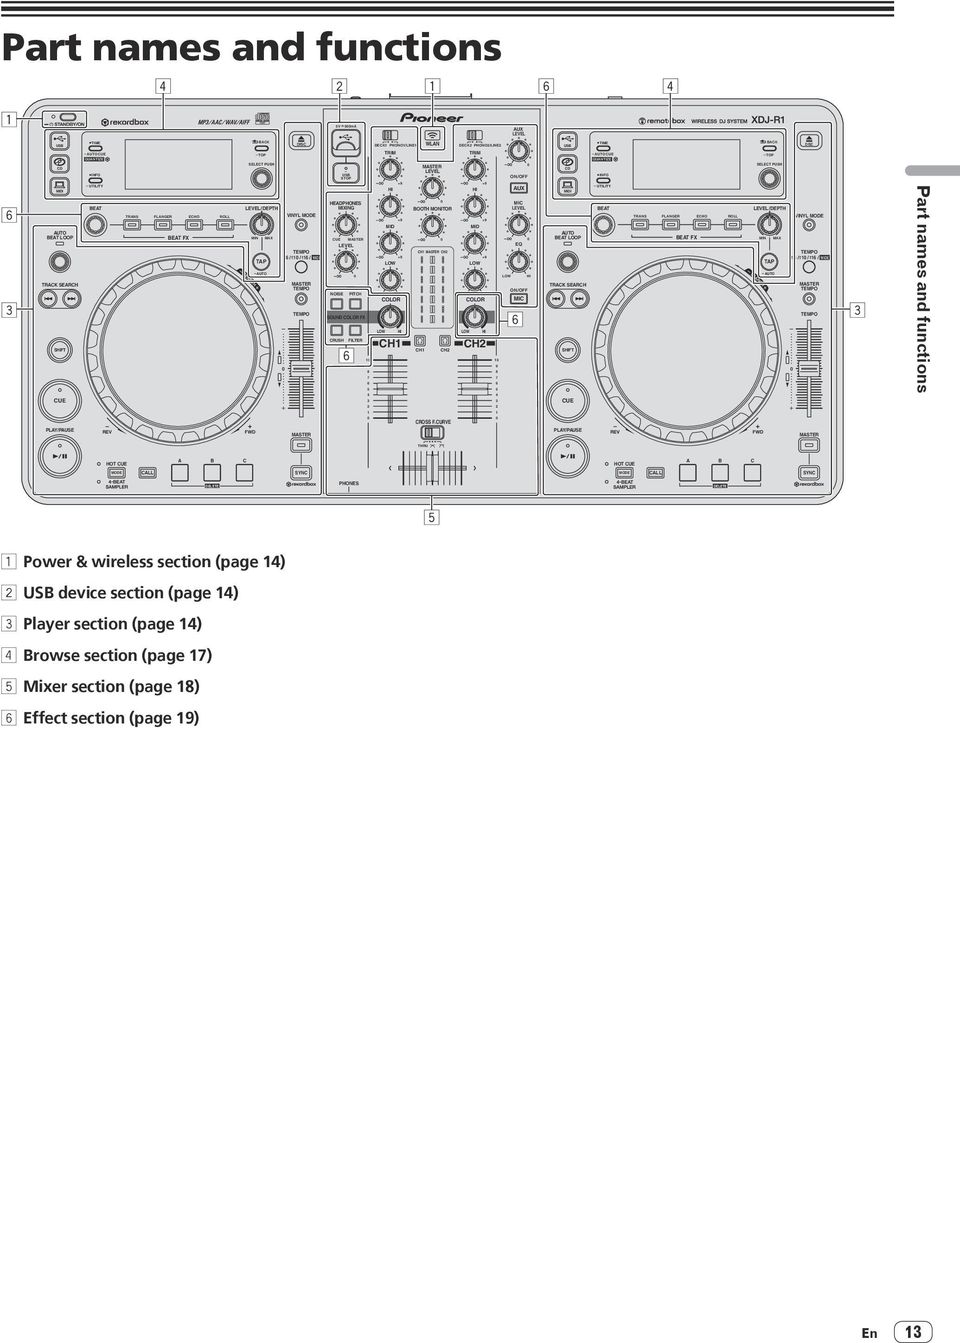 MASTER HEADPHONES MIXING CUE MASTER LEVEL CRUSH USB STOP 6 FILTER 1 9 8 7 6 5 4 3 2 1 DECK1 PHONO1/LINE1 LOW TRIM HI MID LOW HI CH1 WLAN BOOTH MONITOR CH1 CH1 MASTER LEVEL MASTER CH2 CH2 CROSS F.